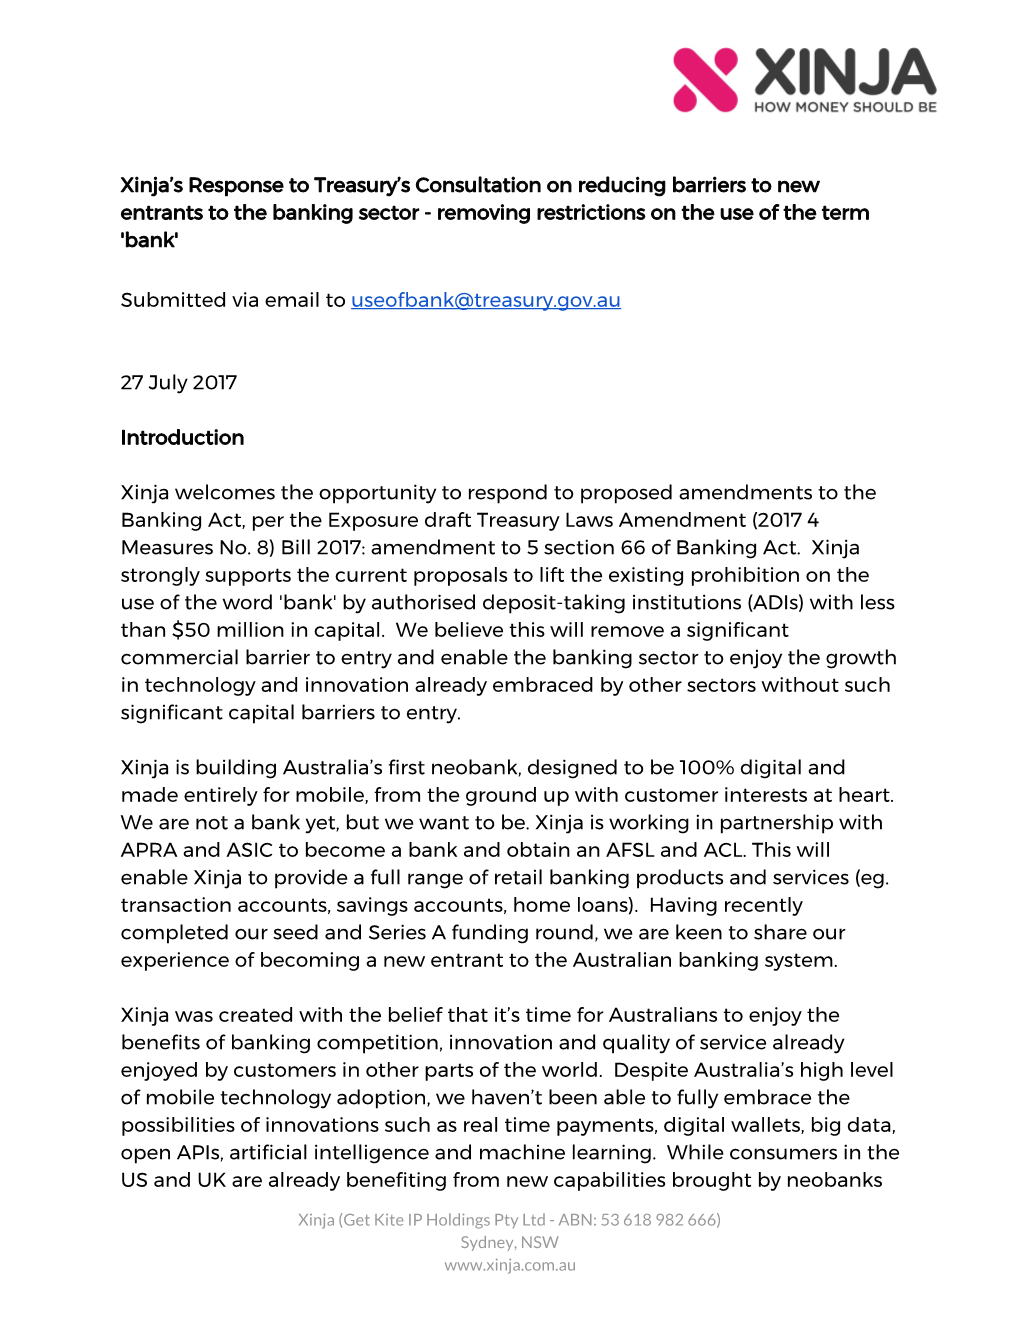 Xinja’S Response to Treasury’S Consultation on Reducing Barriers to New Entrants to the Banking Sector - Removing Restrictions on the Use of the Term 'Bank'